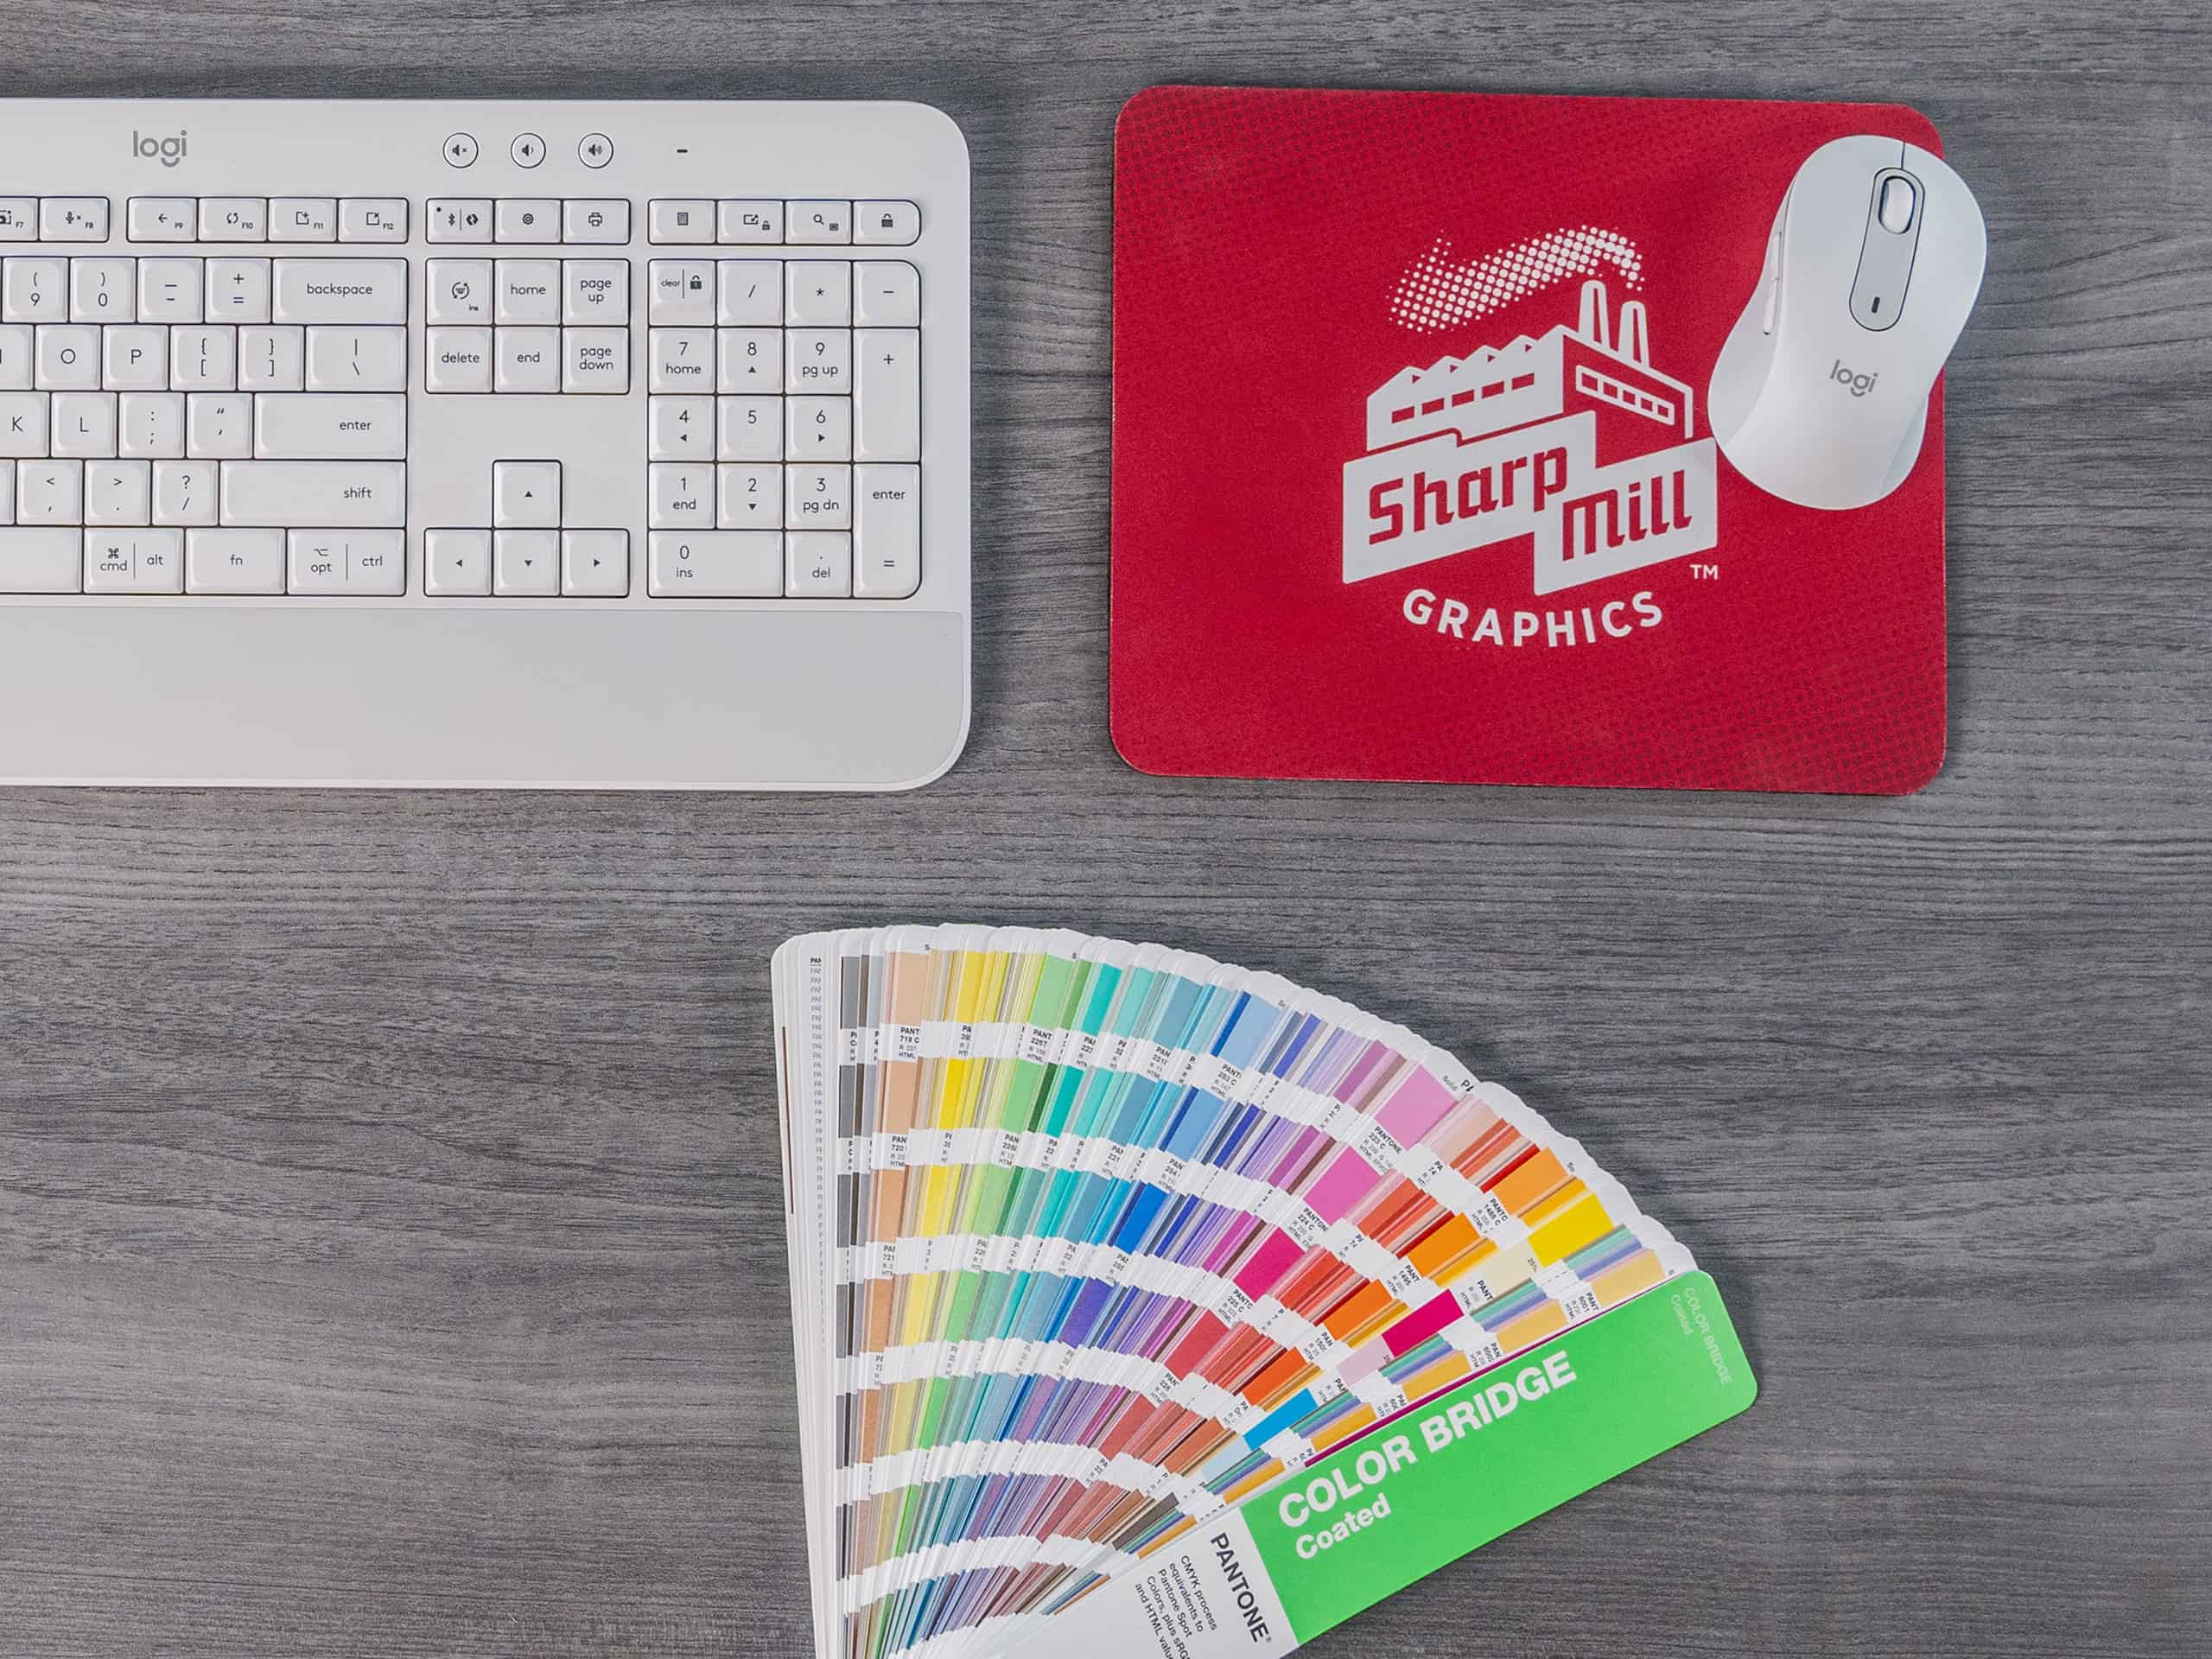 Branded mousepad with color palette and keyboard.